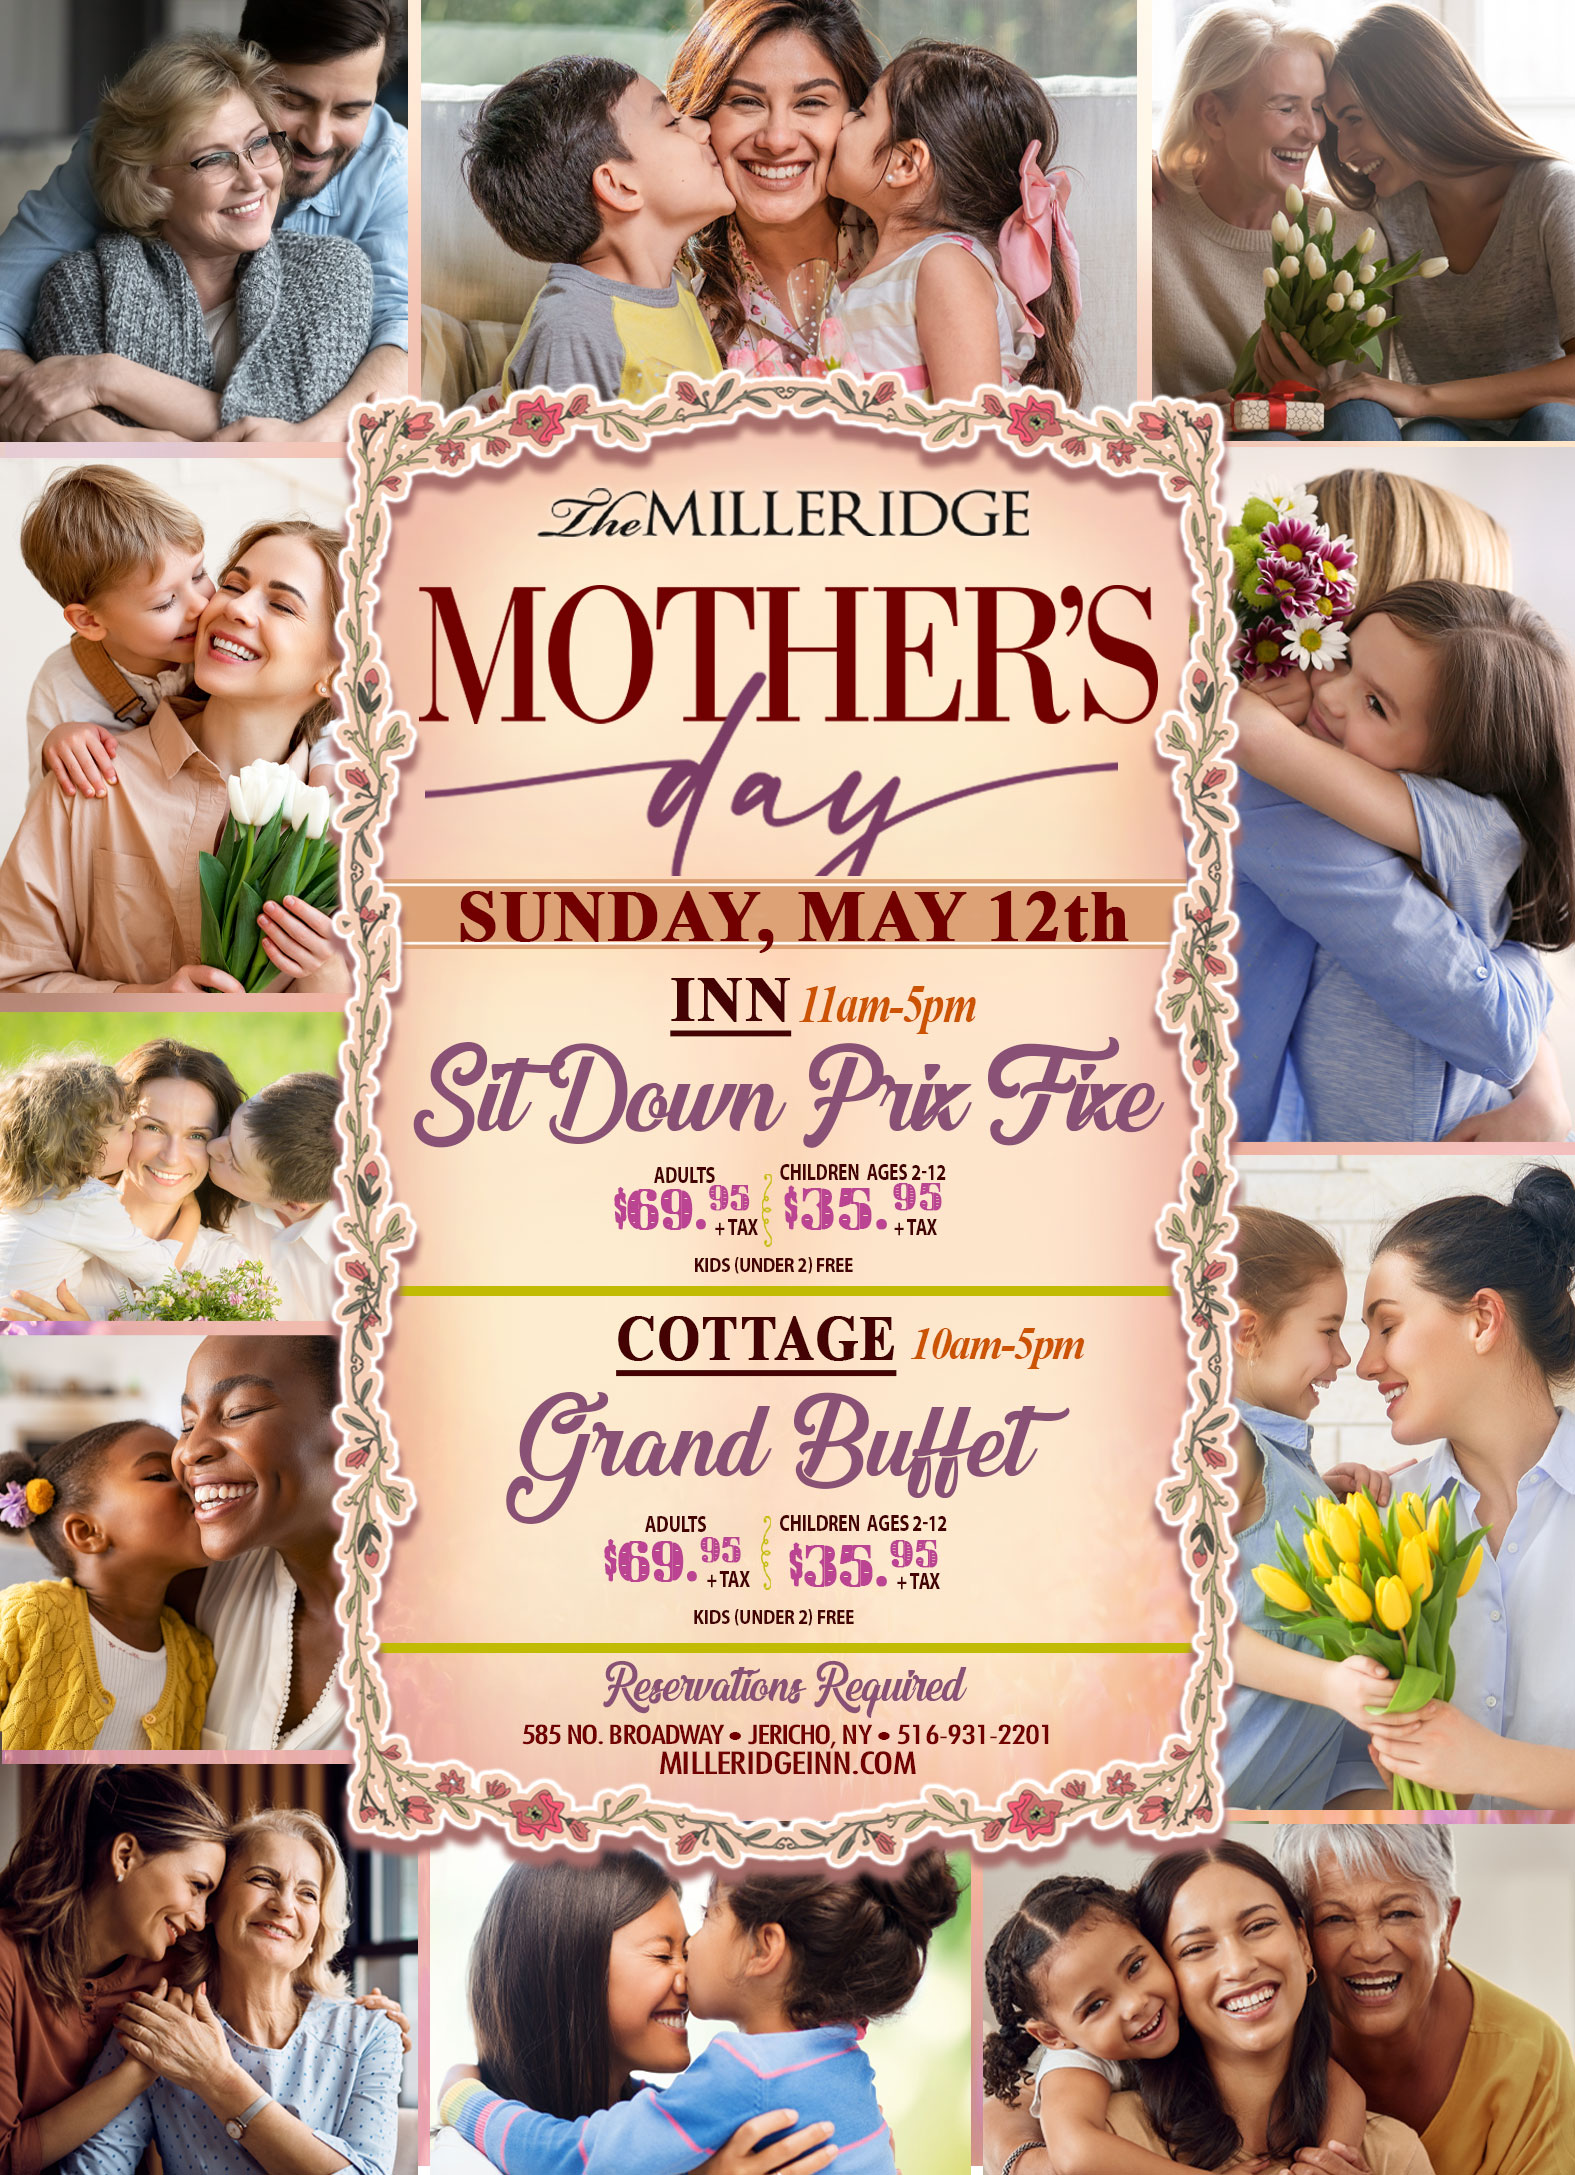 Mothers Day at the Milleridge